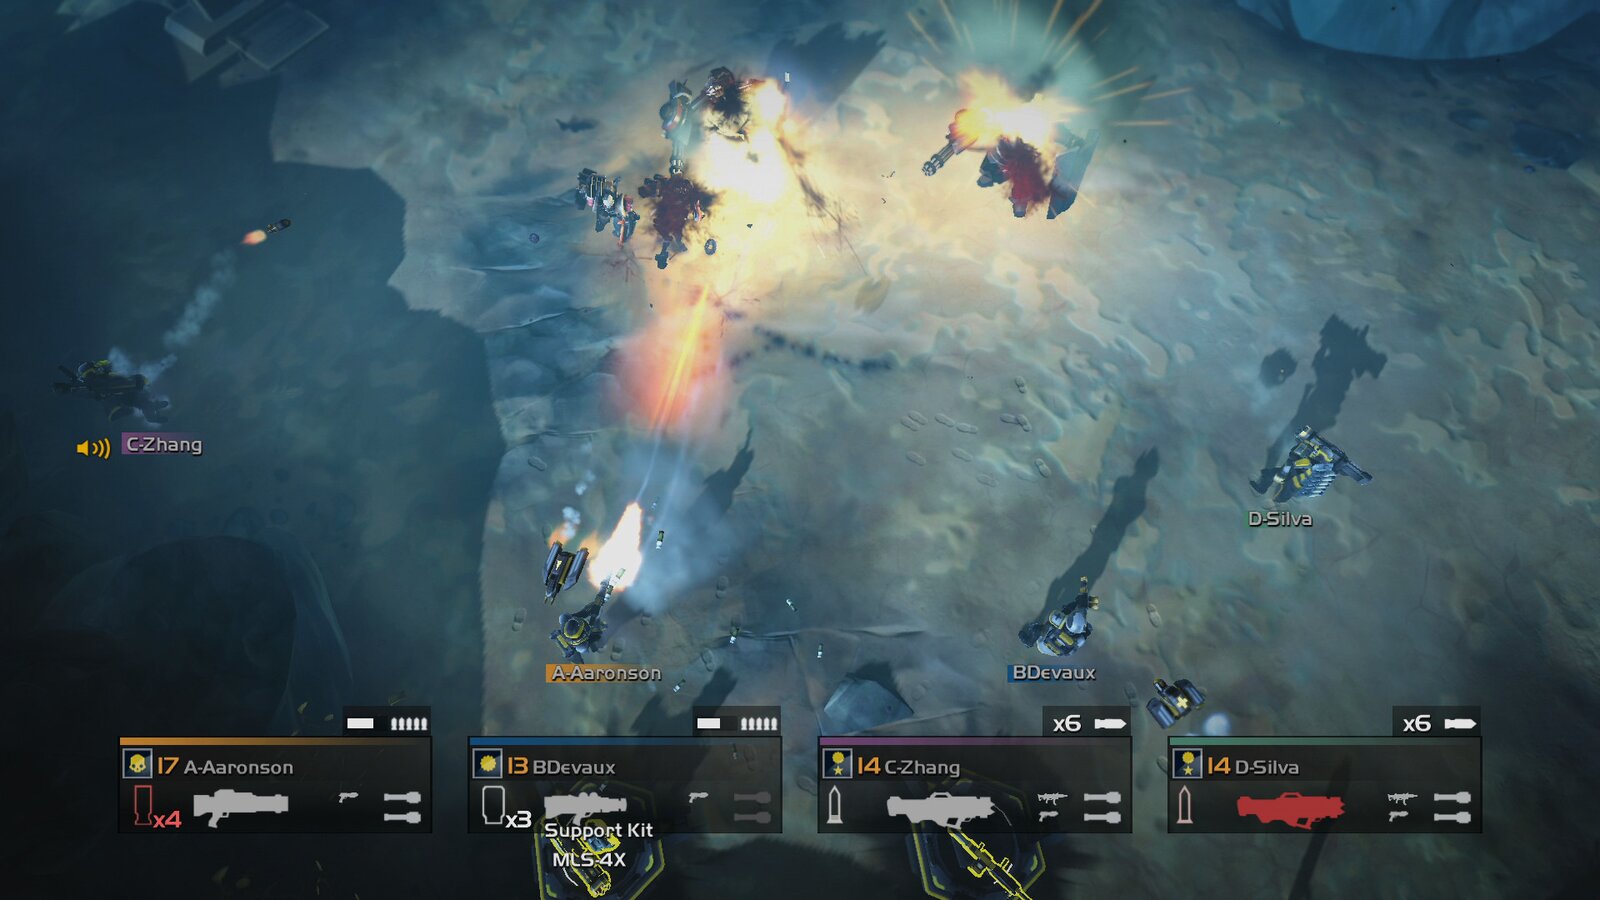 HELLDIVERS - Reinforcements Pack 1